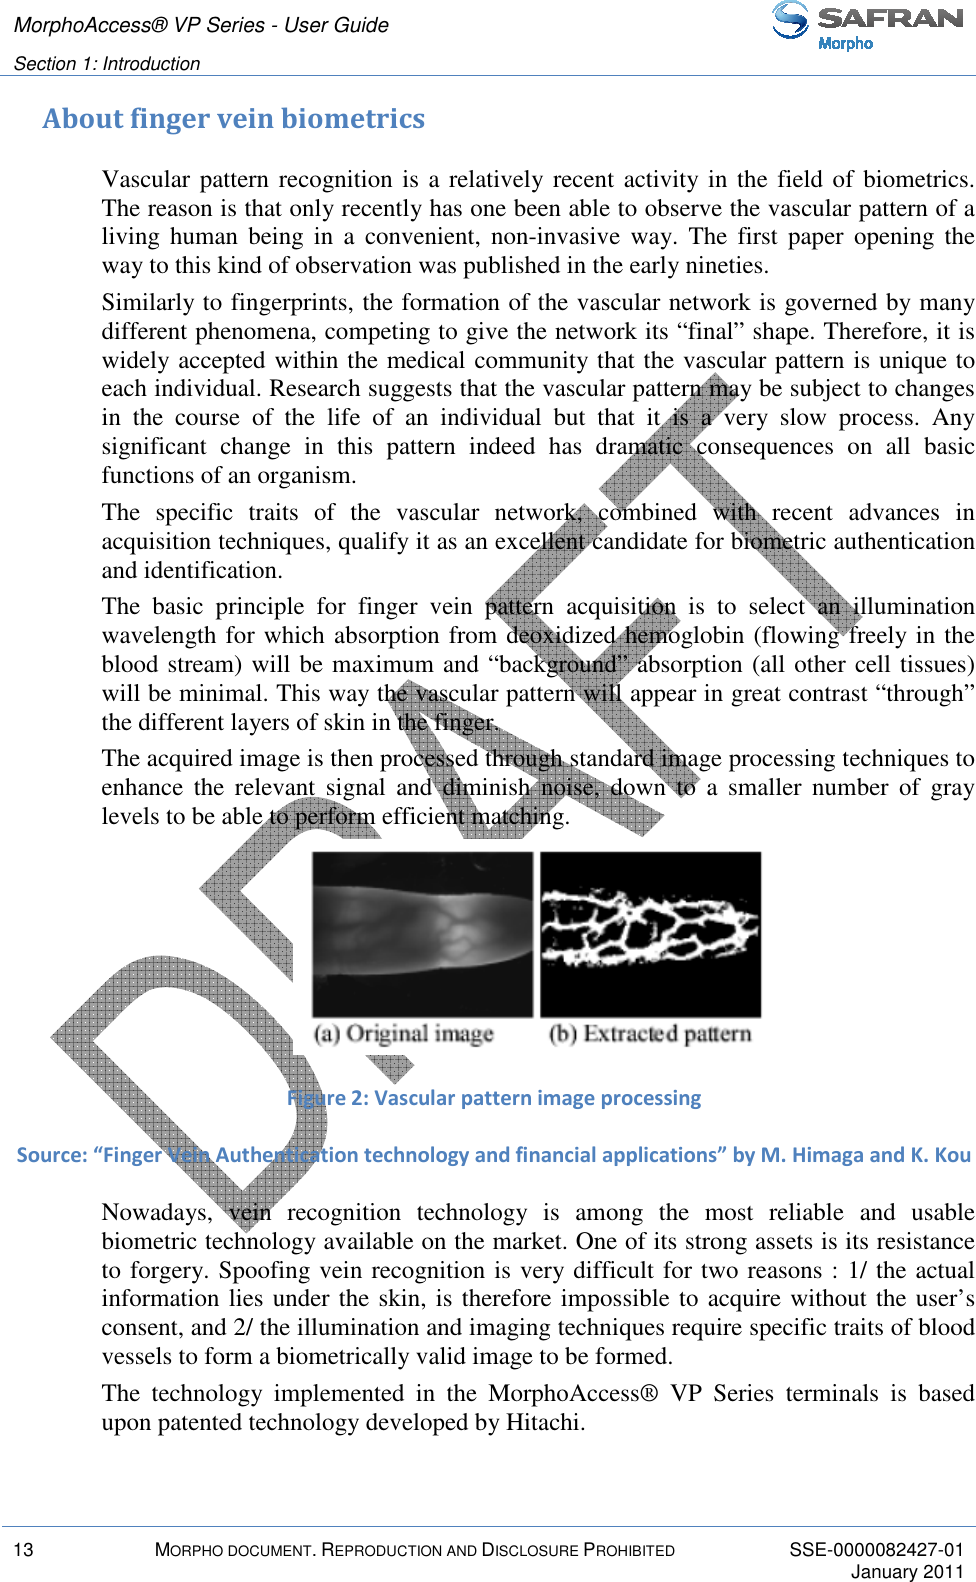 MorphoAccess® VP Series - User Guide   Section 1: Introduction         13  MORPHO DOCUMENT. REPRODUCTION AND DISCLOSURE PROHIBITED  SSE-0000082427-01     January 2011  About finger vein biometrics Vascular pattern recognition is a relatively recent activity in the field of biometrics. The reason is that only recently has one been able to observe the vascular pattern of a living  human  being  in  a  convenient,  non-invasive  way.  The  first  paper  opening  the way to this kind of observation was published in the early nineties. Similarly to fingerprints, the formation of the vascular network is governed by many different phenomena, competing to give the network its “final” shape. Therefore, it is widely accepted within the medical community that the vascular pattern is unique to each individual. Research suggests that the vascular pattern may be subject to changes in  the  course  of  the  life  of  an  individual  but  that  it  is  a  very  slow  process.  Any significant  change  in  this  pattern  indeed  has  dramatic  consequences  on  all  basic functions of an organism.  The  specific  traits  of  the  vascular  network,  combined  with  recent  advances  in acquisition techniques, qualify it as an excellent candidate for biometric authentication and identification.  The  basic  principle  for  finger  vein  pattern  acquisition  is  to  select  an  illumination wavelength for which absorption from deoxidized hemoglobin (flowing freely in the blood stream) will be maximum and “background” absorption (all other cell tissues) will be minimal. This way the vascular pattern will appear in great contrast “through” the different layers of skin in the finger. The acquired image is then processed through standard image processing techniques to enhance  the  relevant  signal  and  diminish  noise,  down  to  a  smaller  number  of  gray levels to be able to perform efficient matching.  Figure 2: Vascular pattern image processing Source: “Finger Vein Authentication technology and financial applications” by M. Himaga and K. Kou Nowadays,  vein  recognition  technology  is  among  the  most  reliable  and  usable biometric technology available on the market. One of its strong assets is its resistance to forgery. Spoofing vein recognition is very difficult for two reasons : 1/ the actual information lies under the skin, is therefore impossible to acquire without the user’s consent, and 2/ the illumination and imaging techniques require specific traits of blood vessels to form a biometrically valid image to be formed. The  technology  implemented  in  the  MorphoAccess®  VP  Series  terminals  is  based upon patented technology developed by Hitachi. 